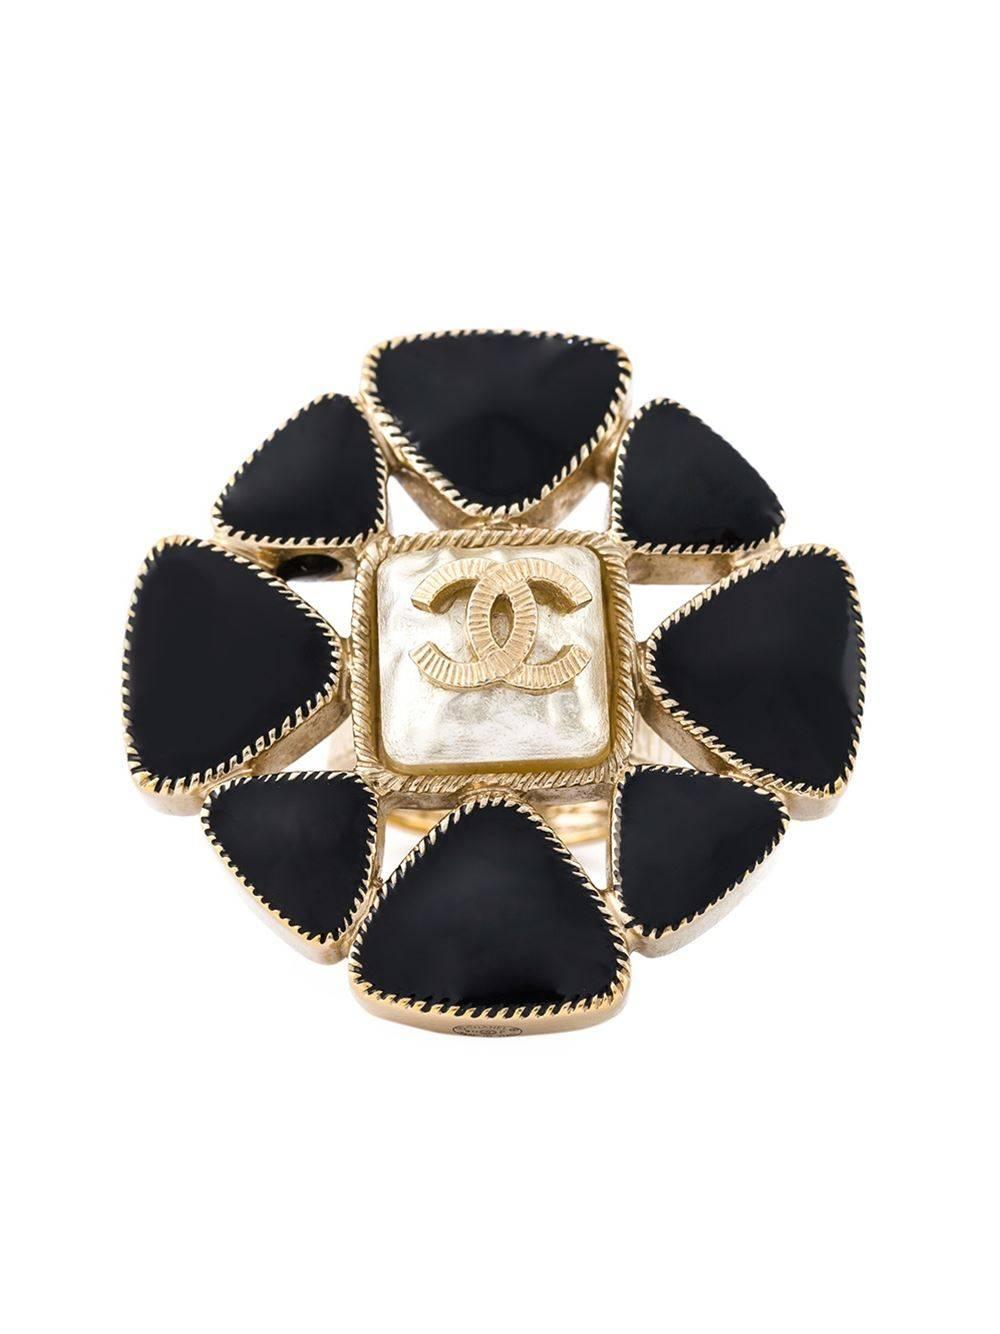 Gold-tone and black metal ring.

Colour: Gold-tone, Black

Material: Metal (Other) 85% Glass 15%

Measurements: Circumference: 53mm

Condition: 10 out of 10
Excellent, Next-to-new